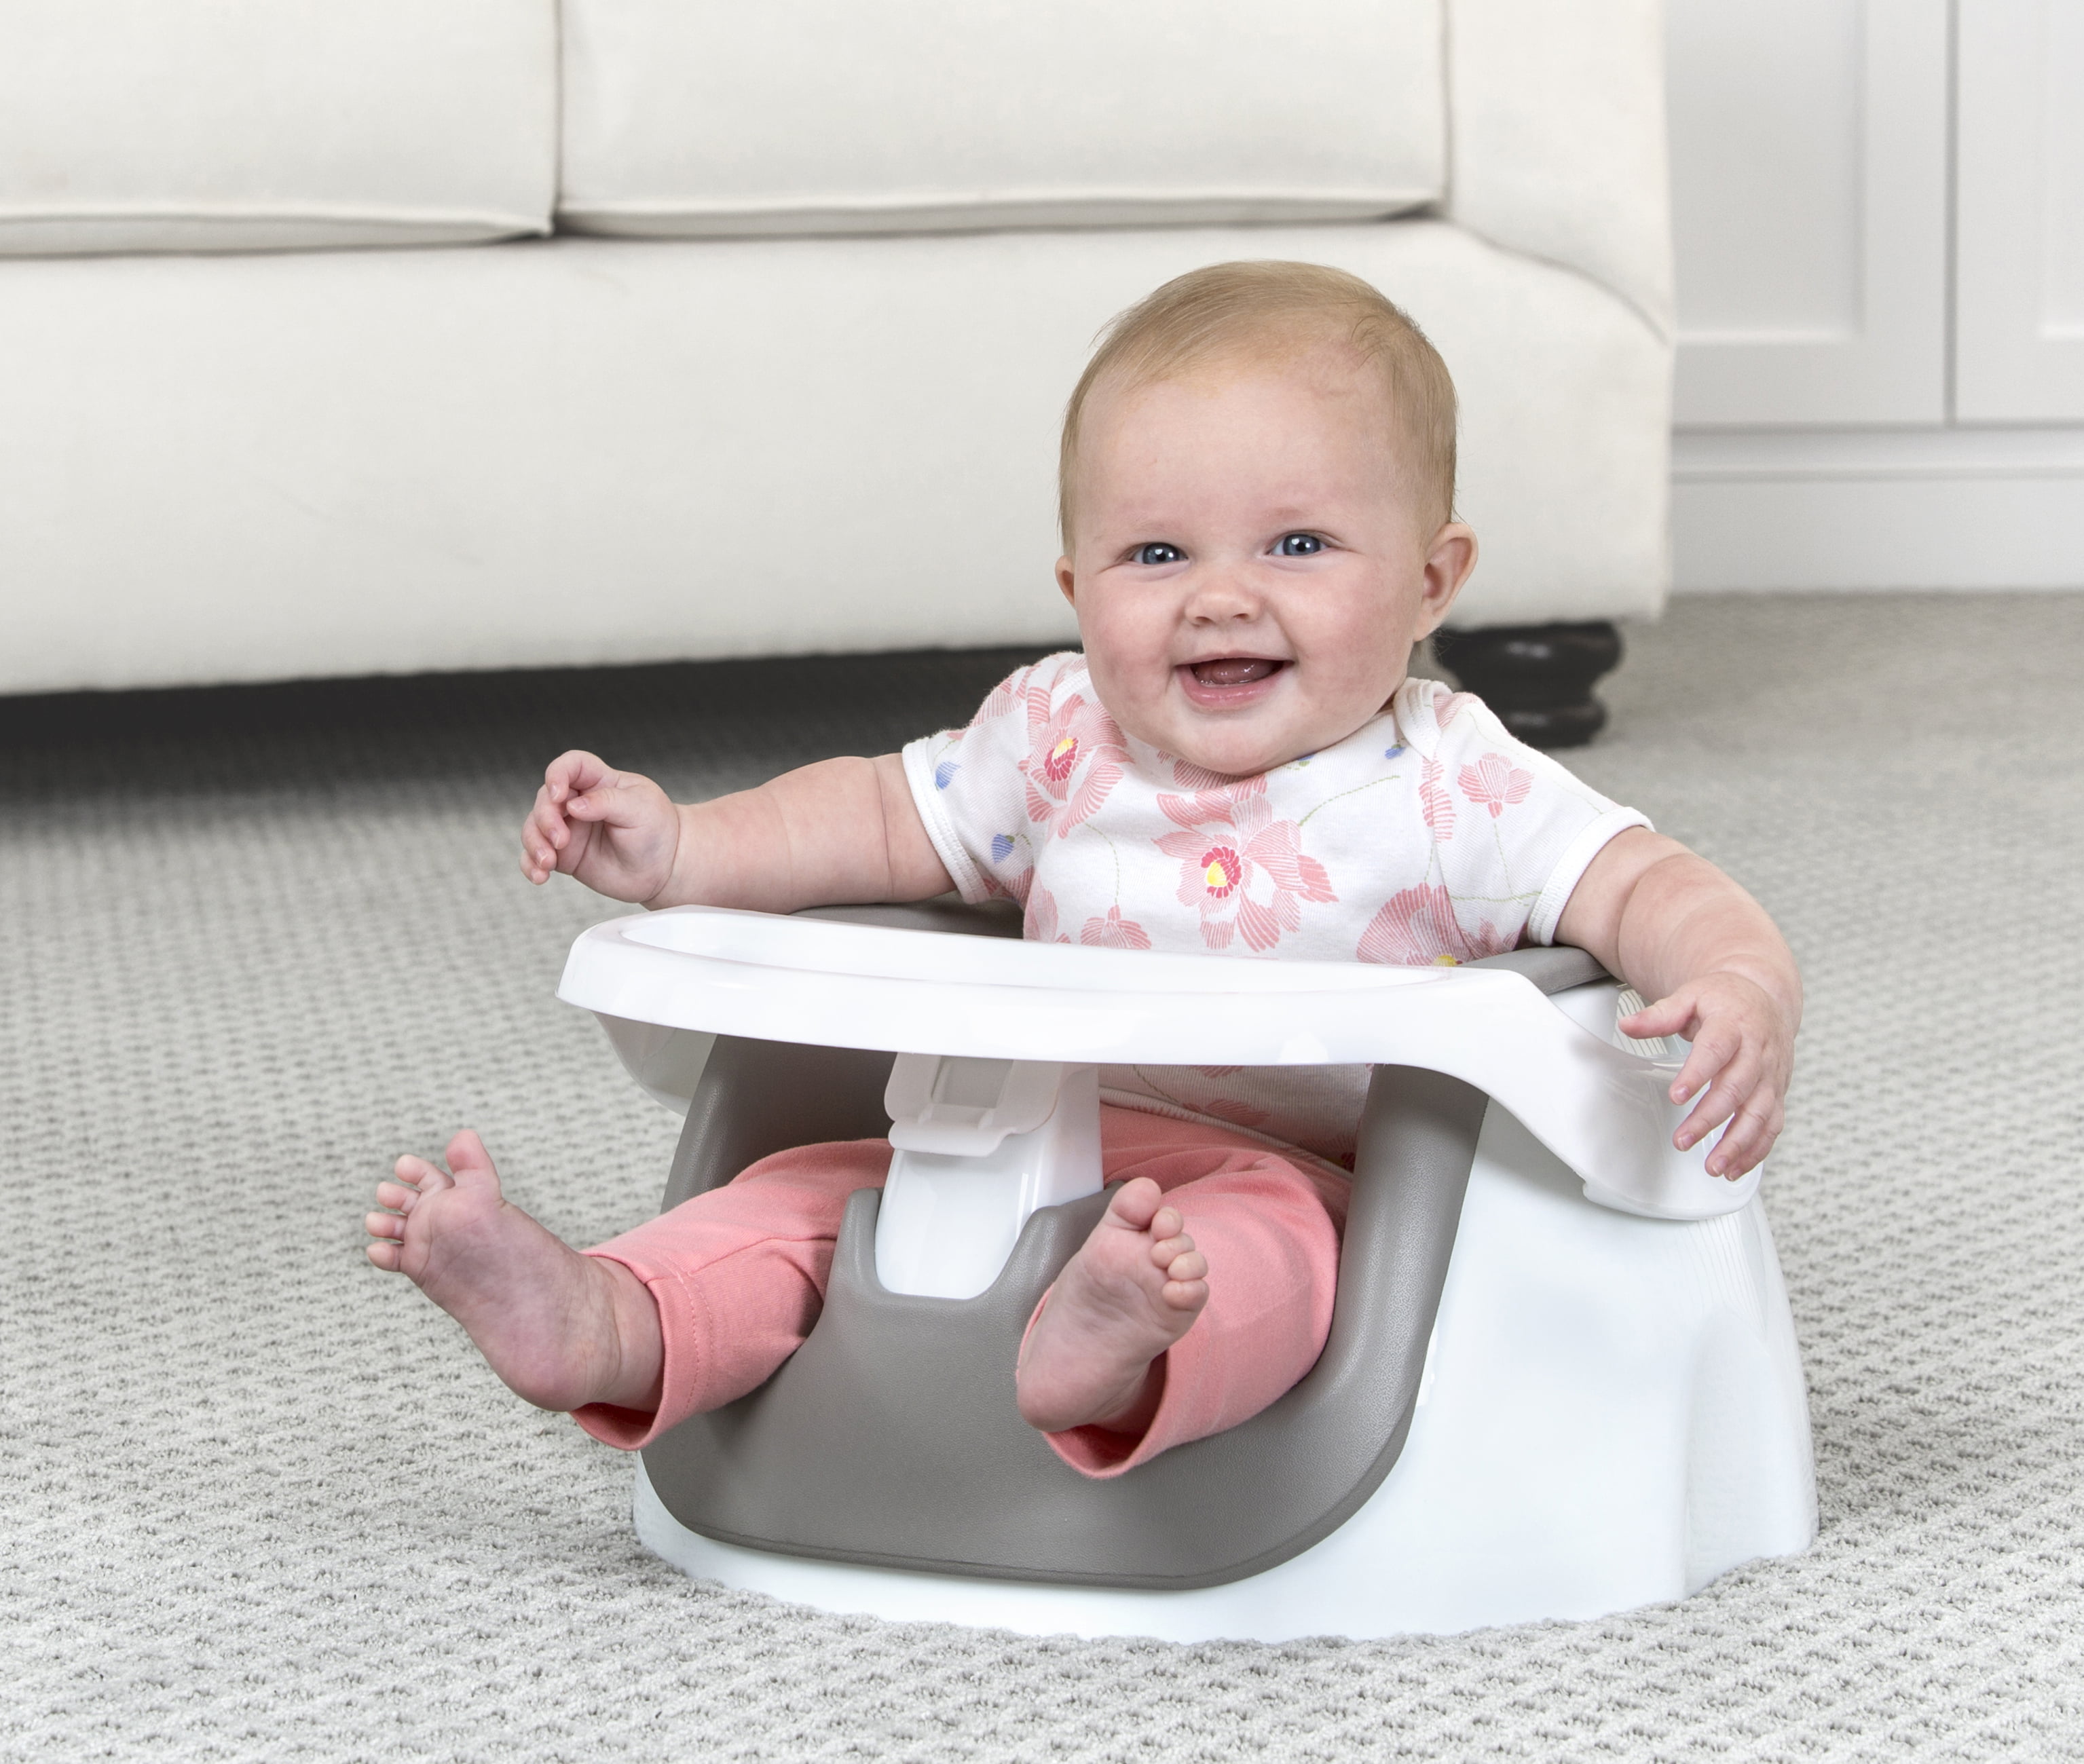 baby support chair